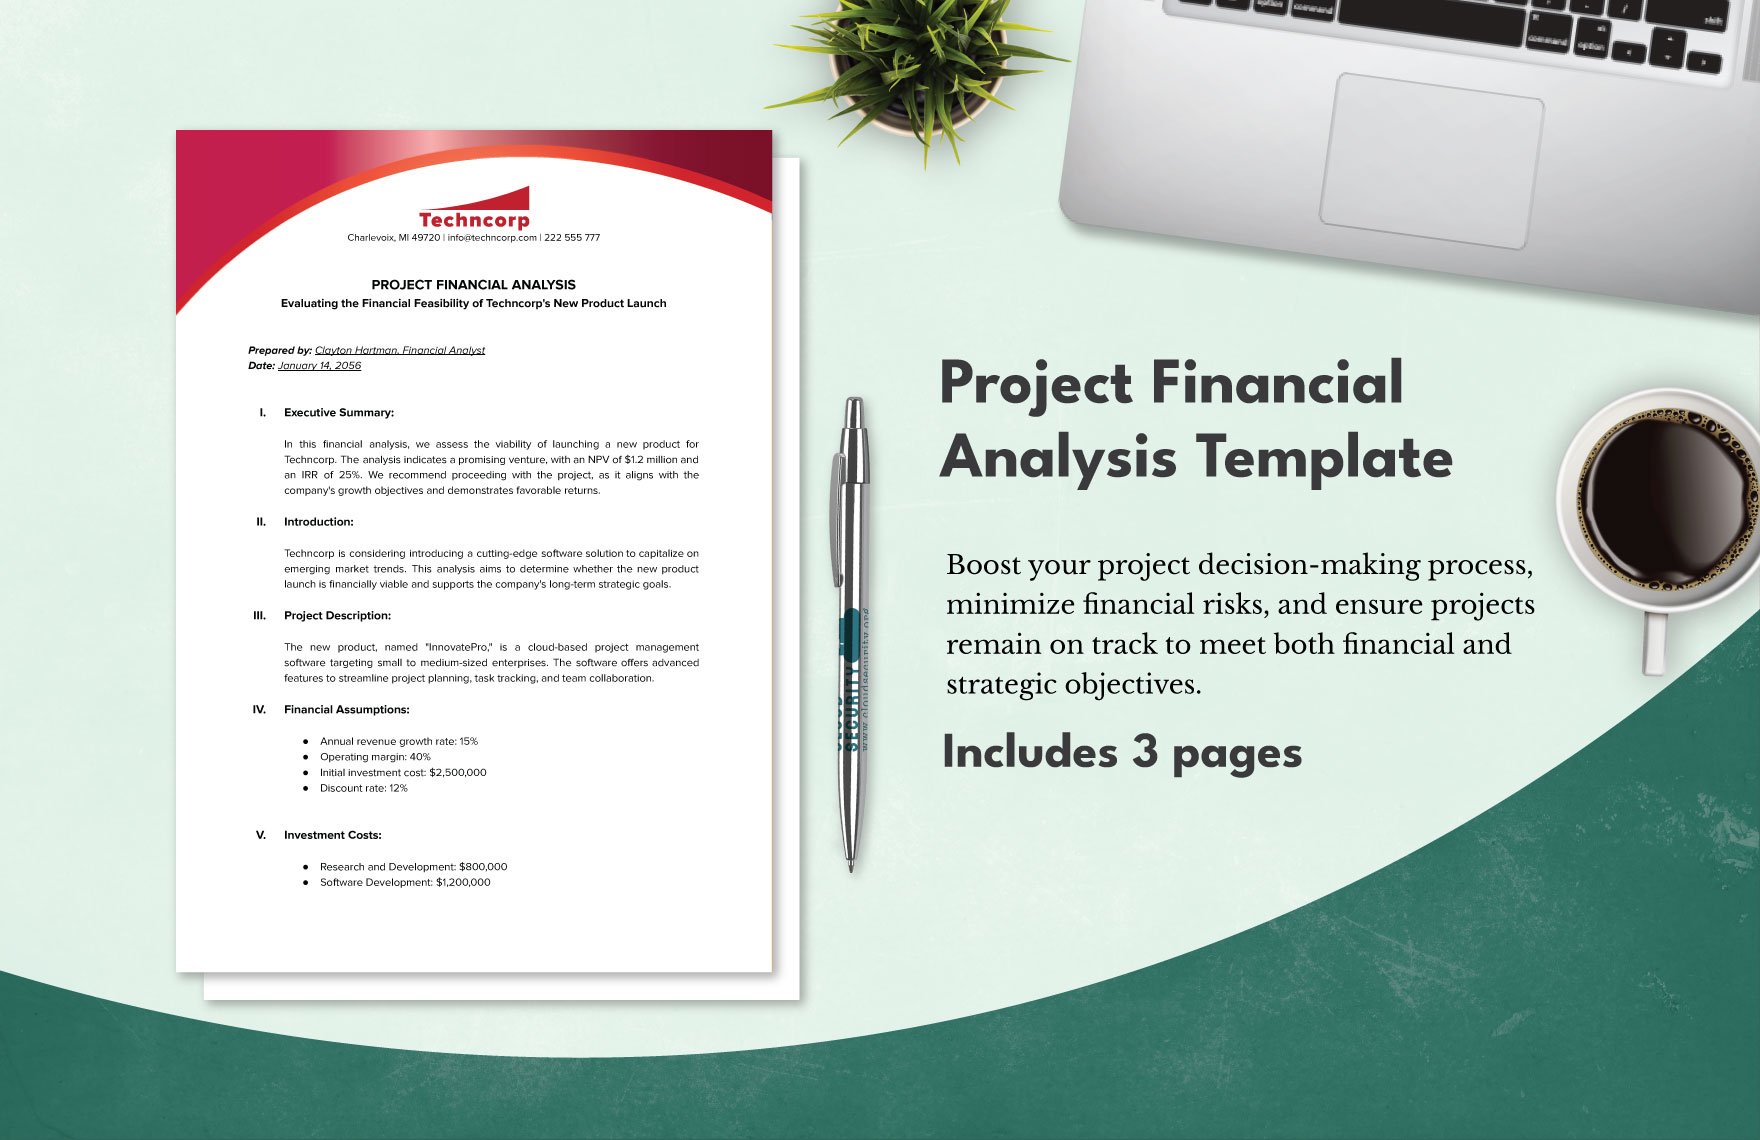 Project Financial Analysis Template